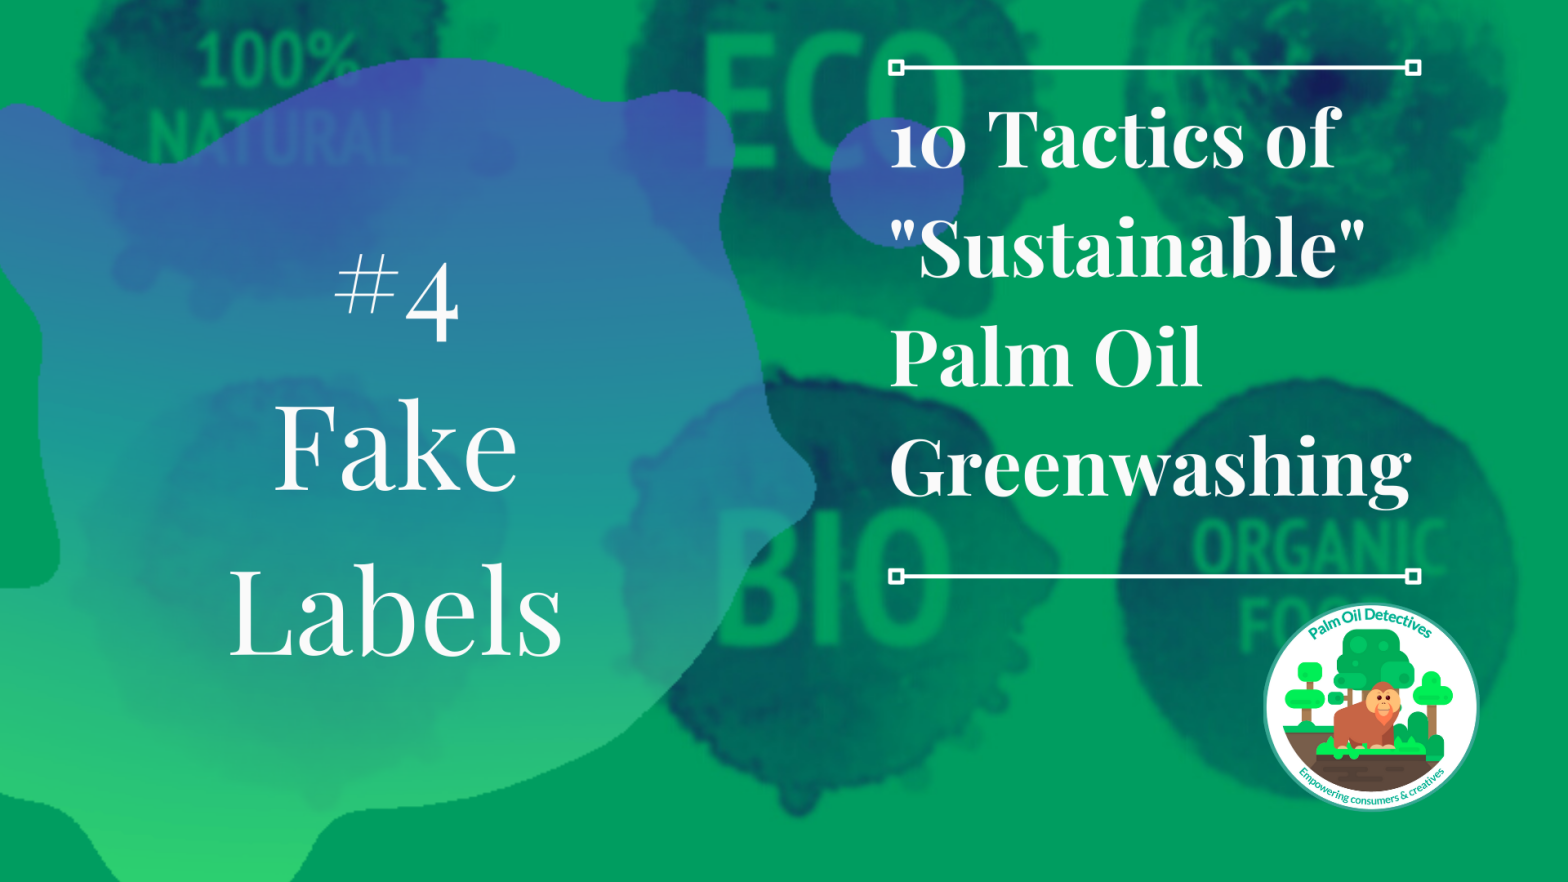 10 Tactics of Sustainable Palm Oil Greenwashing Tactic 4 Fake Labels